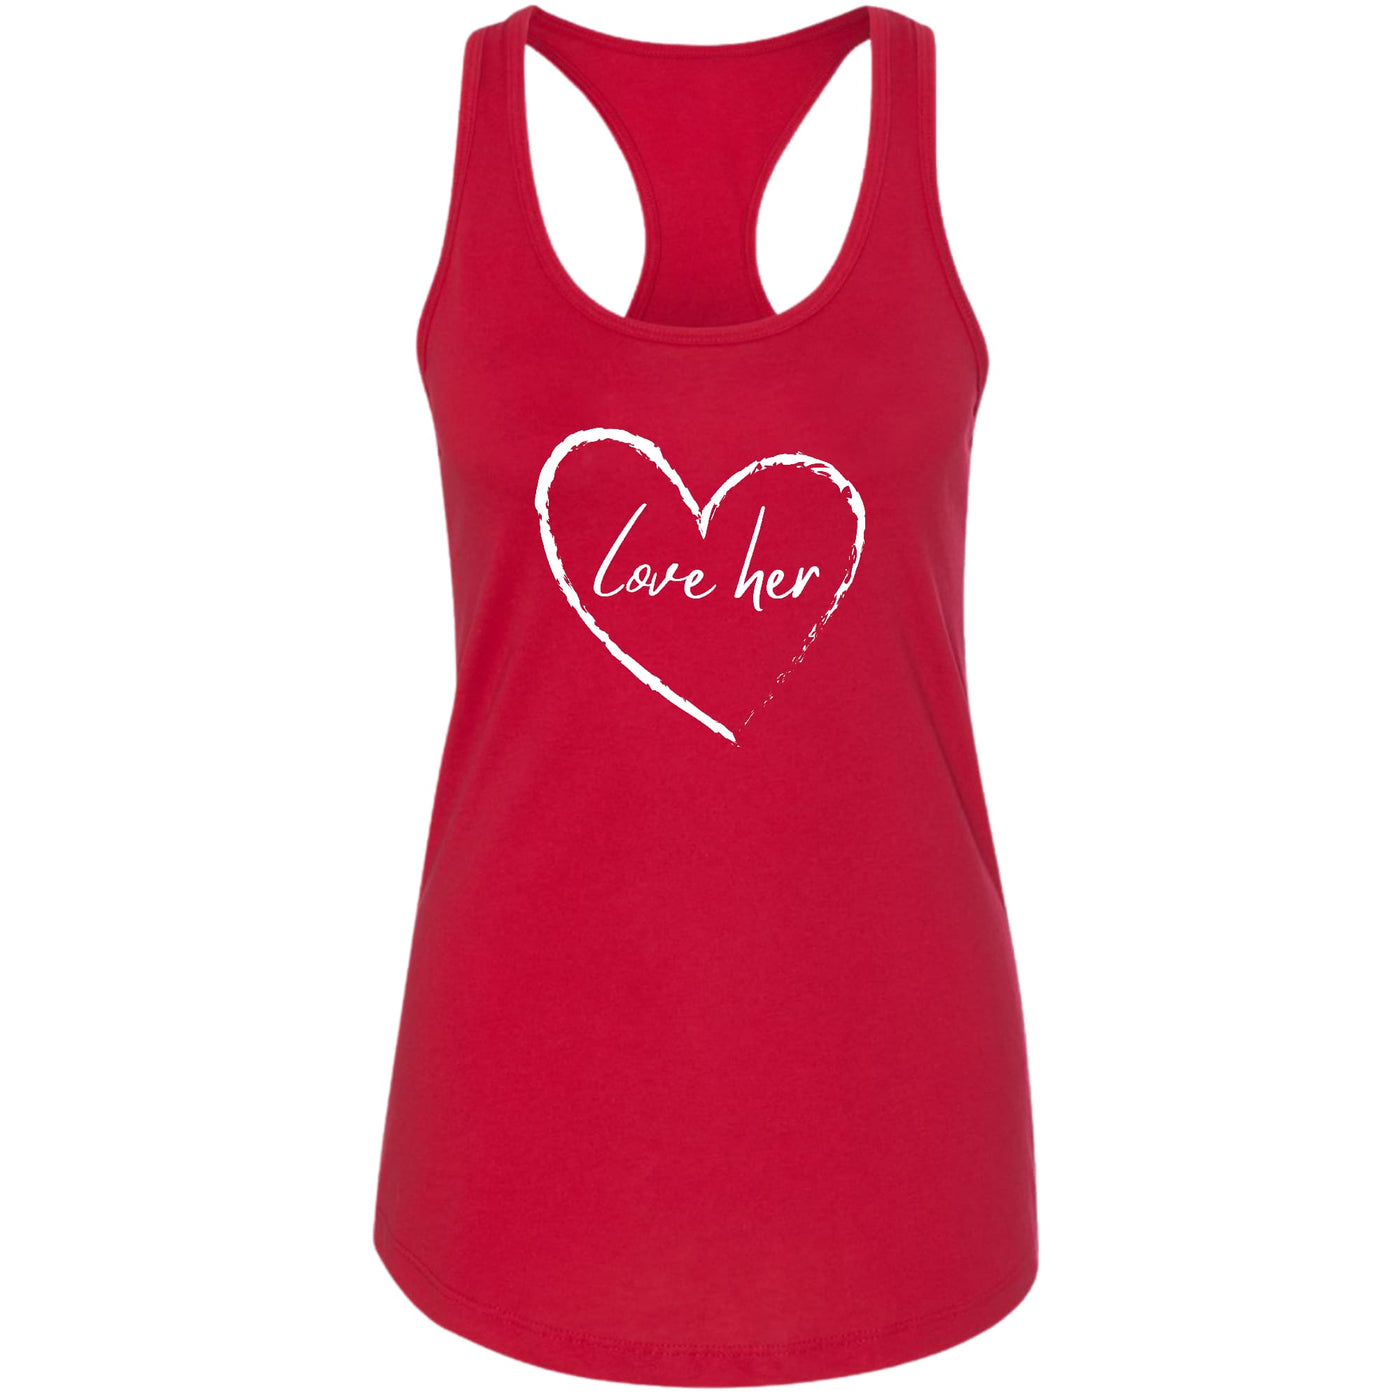 Womens Tank Top Fitness T - shirt Say It Soul Love Her - Tops